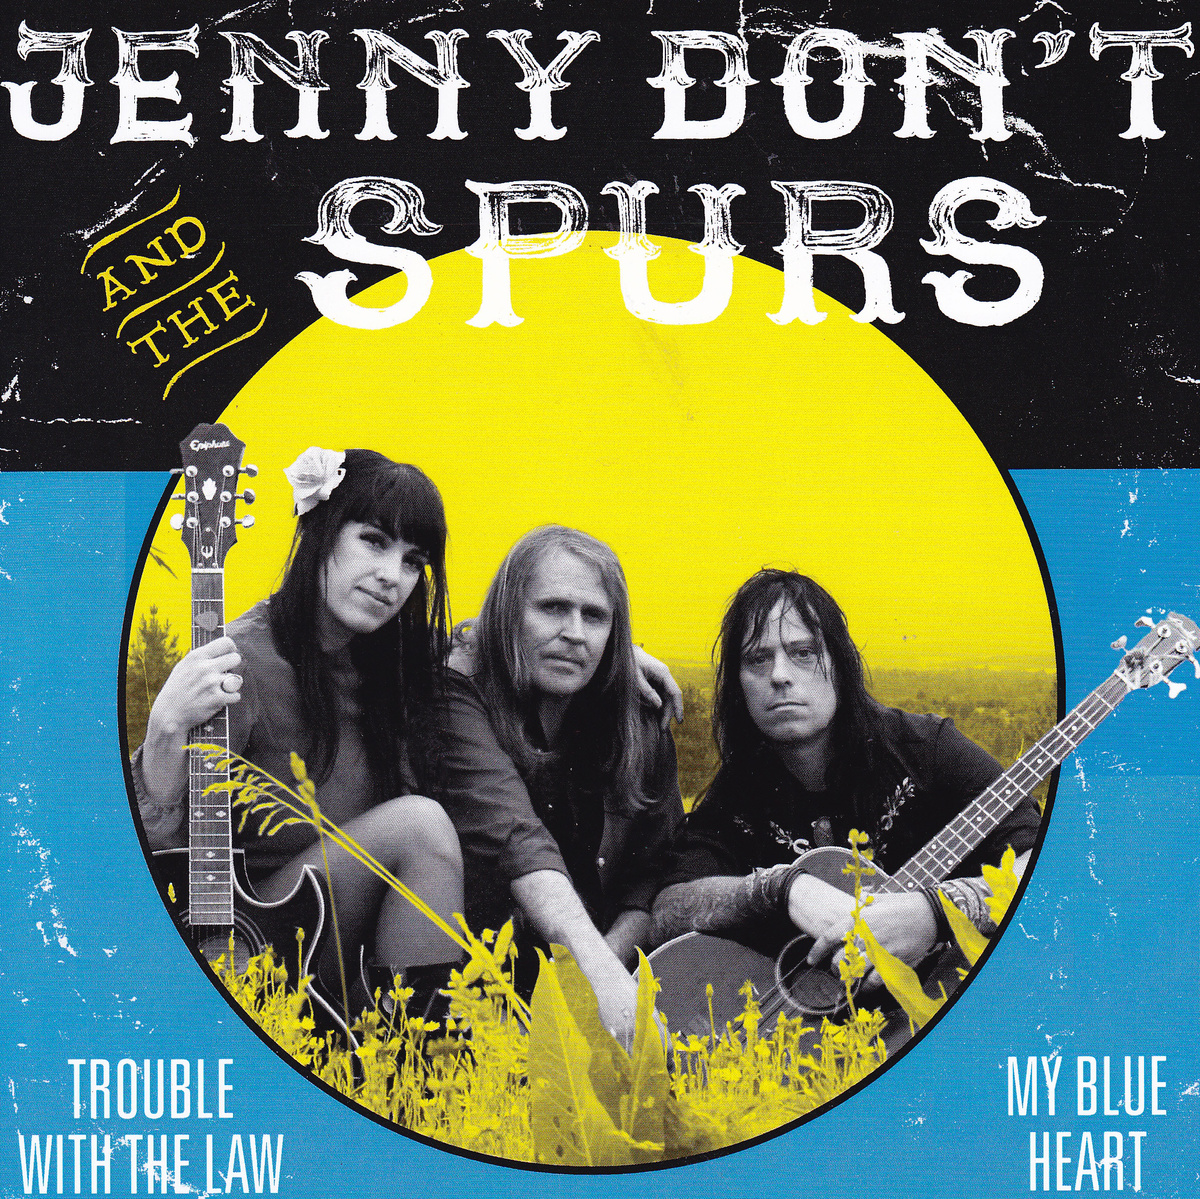 Jenny Don't- Trouble With The Law B/w My Blue Heart 7"